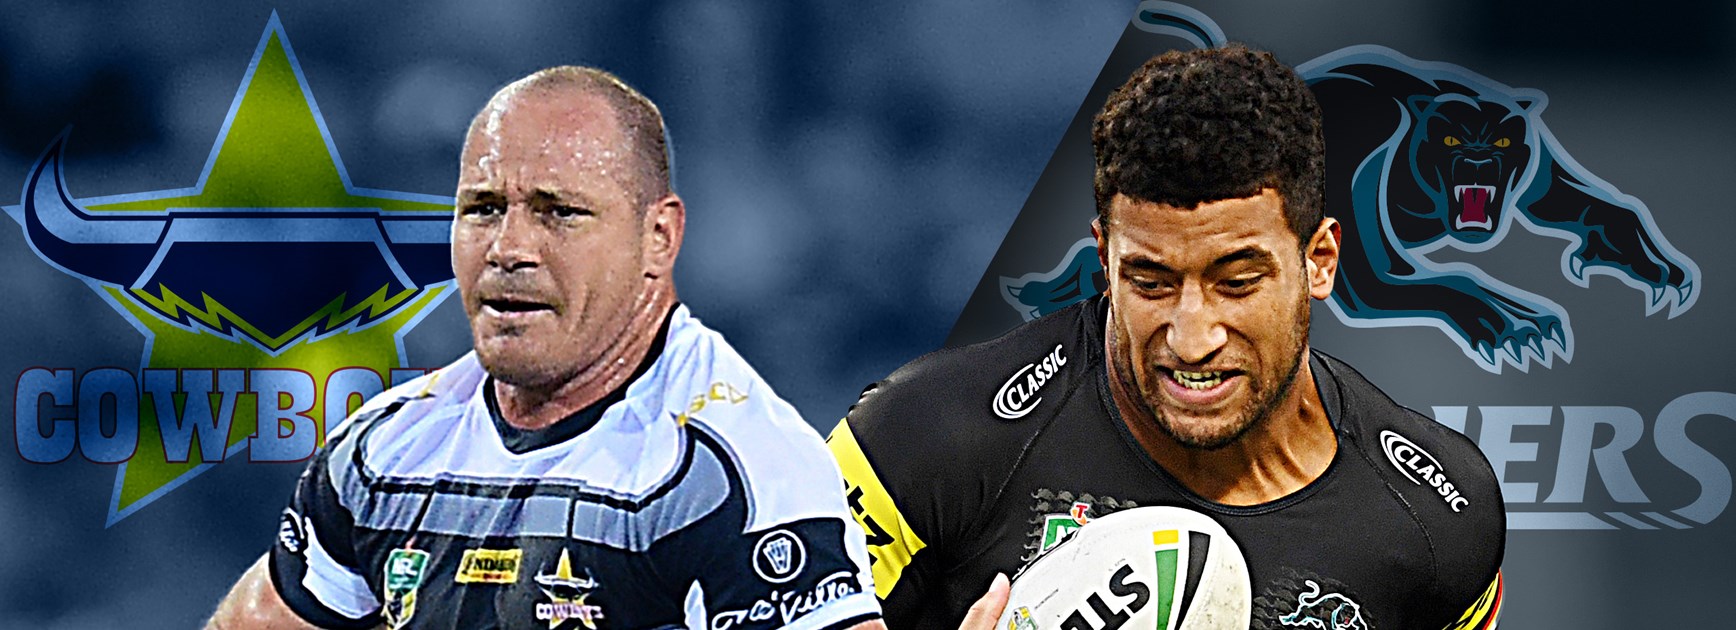 Cowboys v Panthers: Cleary replacements named